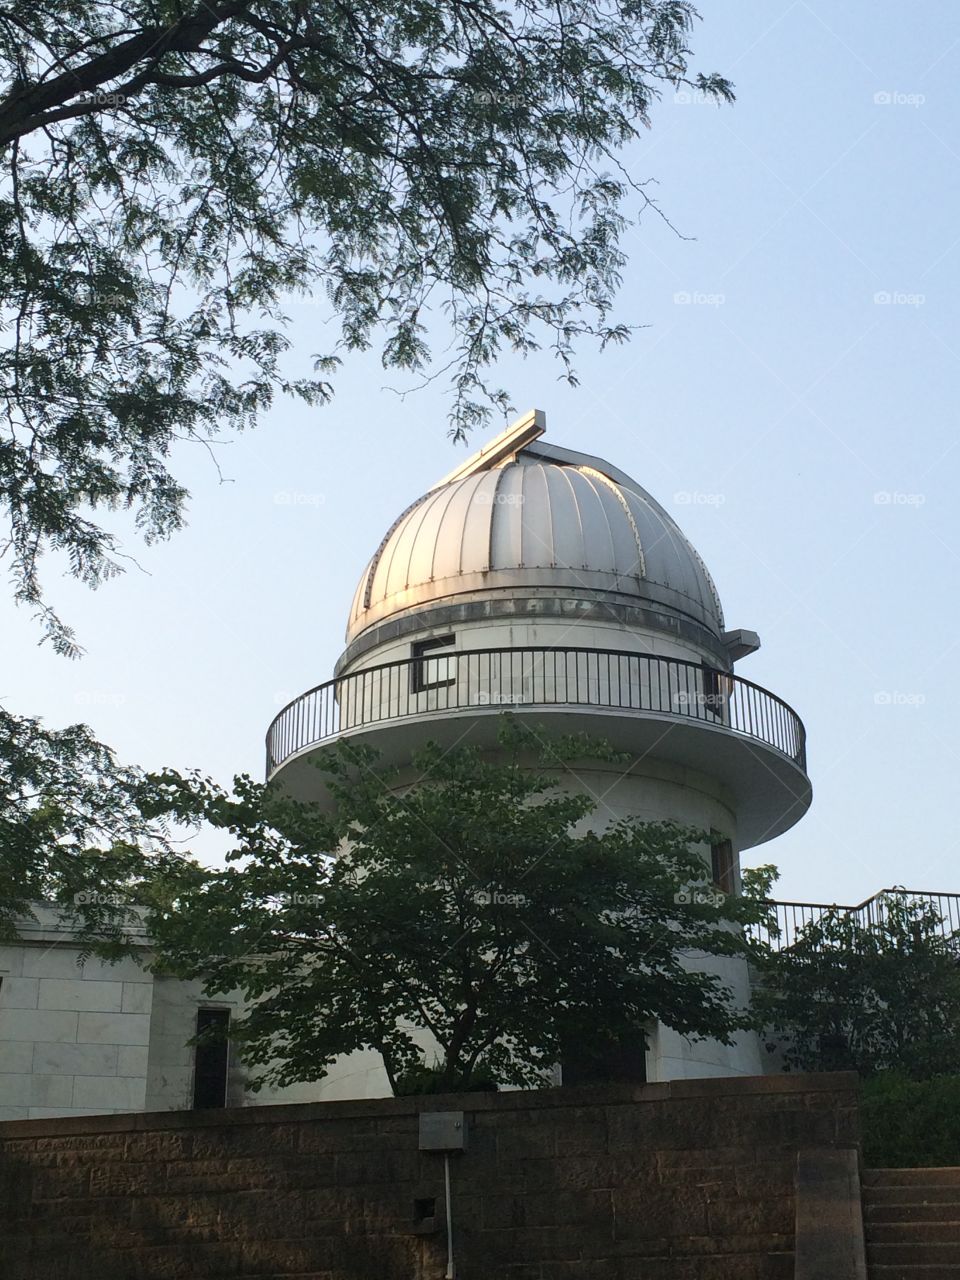 Observatory . An old observatory at an Ohio University